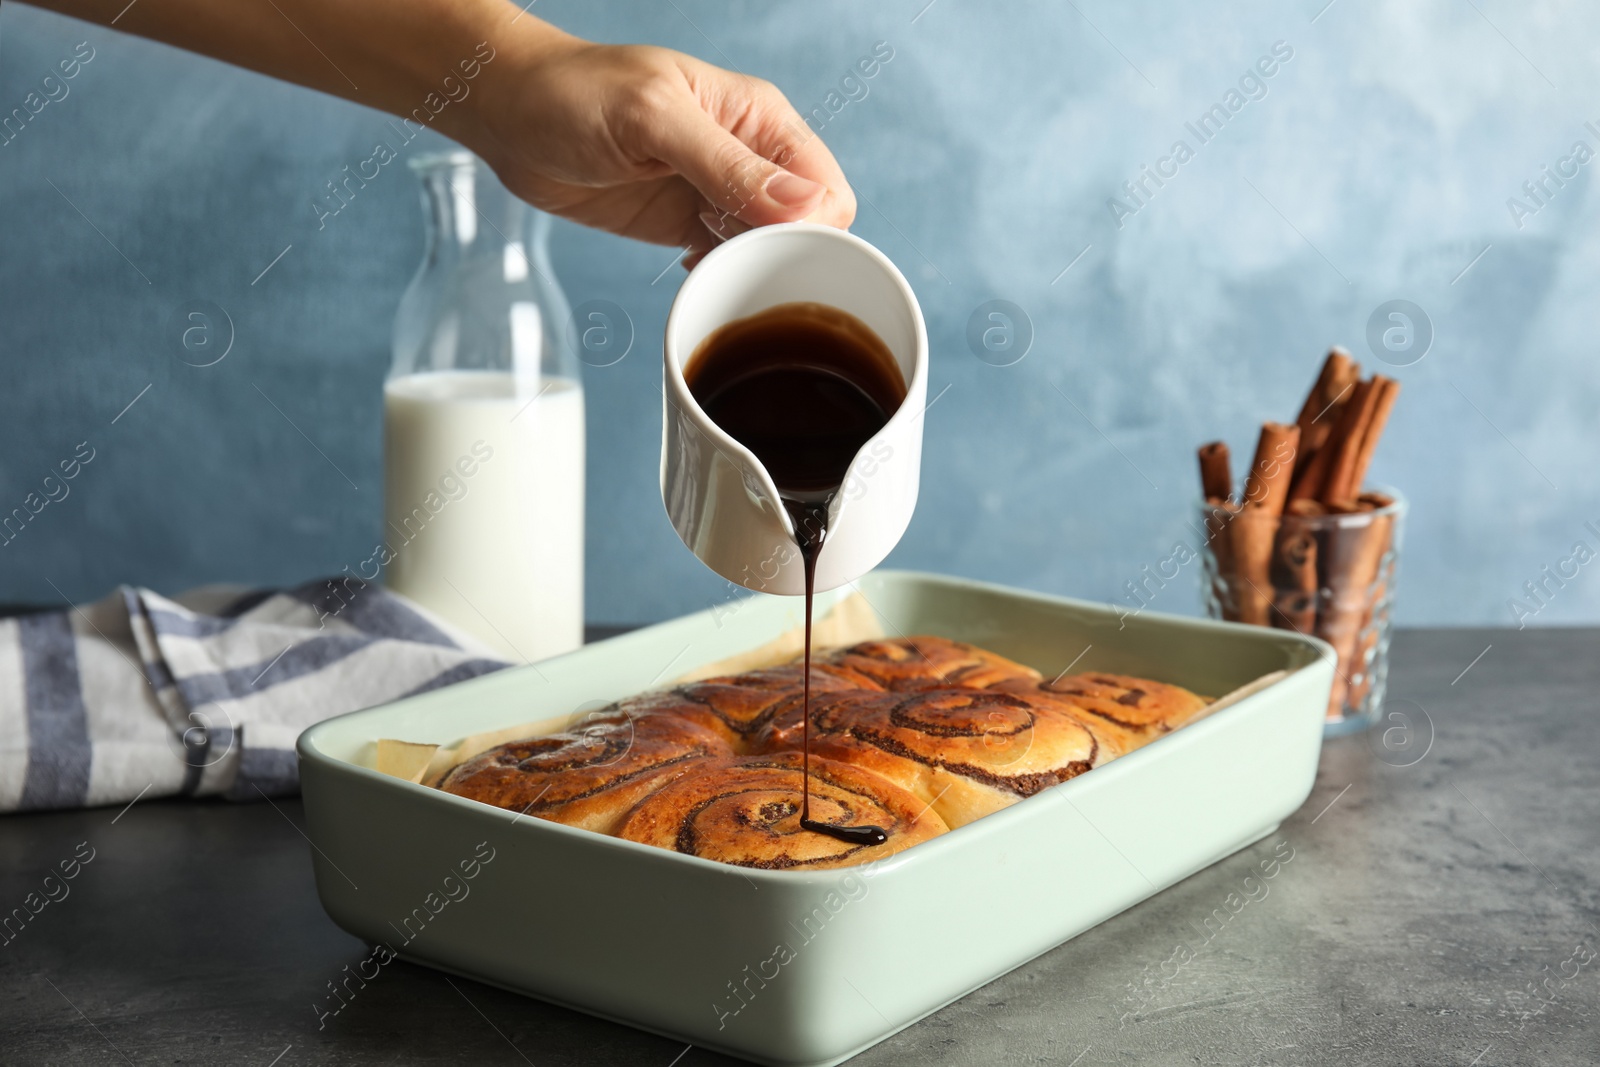 Photo of Woman pouring chocolate syrup onto freshly baked cinnamon rolls on table, closeup